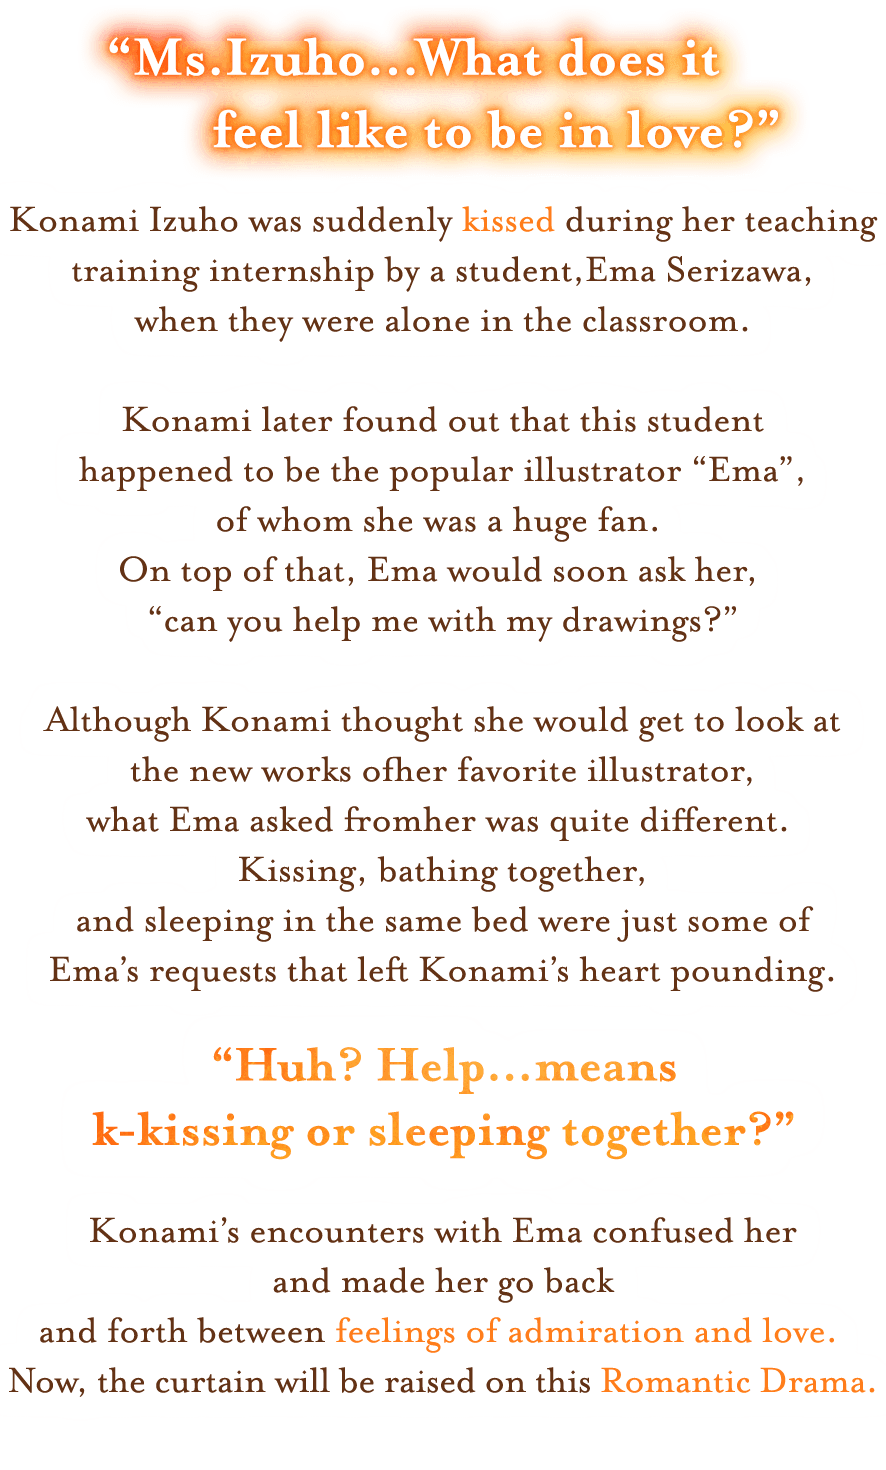 “Ms.Izuho…What does it feel like to be in love?” 
Konami Izuho was suddenly kissed during her teaching training internship by a student, Ema Serizawa, 
when they were alone in the classroom.

Konami later found out that this student happened to be the popular illustrator “Ema”, of whom she was a huge fan. 
On top of that, Ema would soon ask her, “can you help me with my drawings?”

Although Konami thought she would get to look at the new works of her favorite illustrator, 
what Ema asked from her was quite different. Kissing, bathing together, 
and sleeping in the same bed were just some of Ema’s requests that left Konami’s heart pounding.

“Huh? Help…means k-kissing or sleeping together?”

Konami’s encounters with Ema confused her and made her go back and forth between feelings of admiration and love. Now, 
the curtain will be raised on this Romantic Drama.